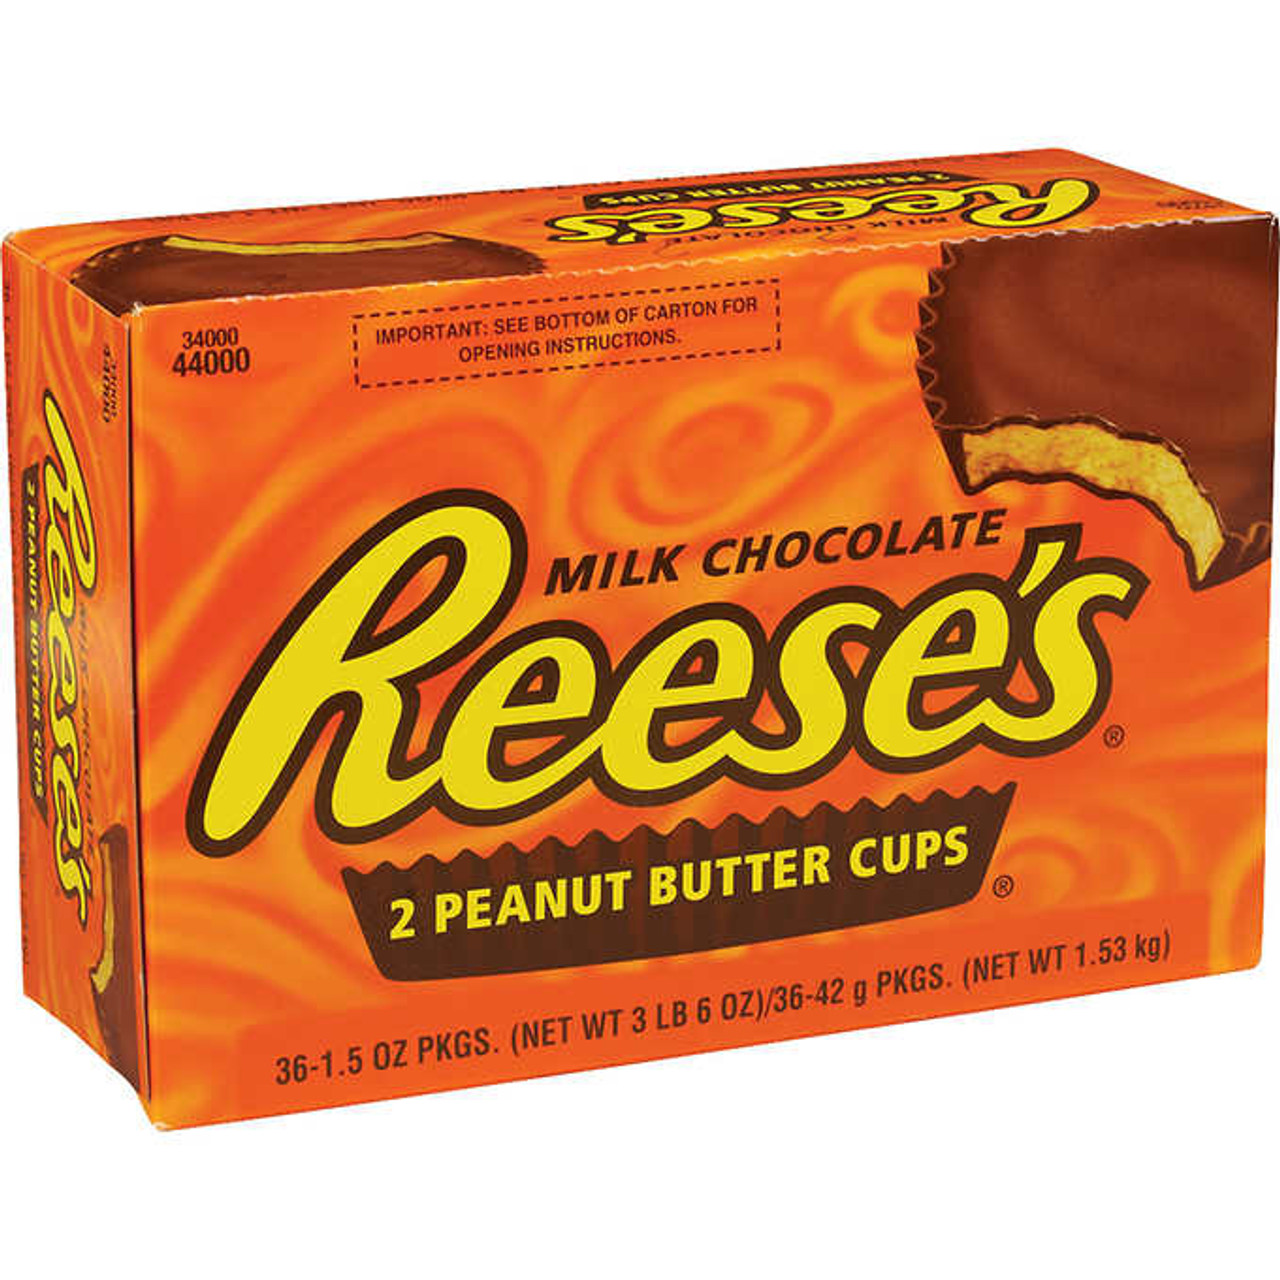 REESE'S PIECES Peanut Butter Candy, 1.53 oz